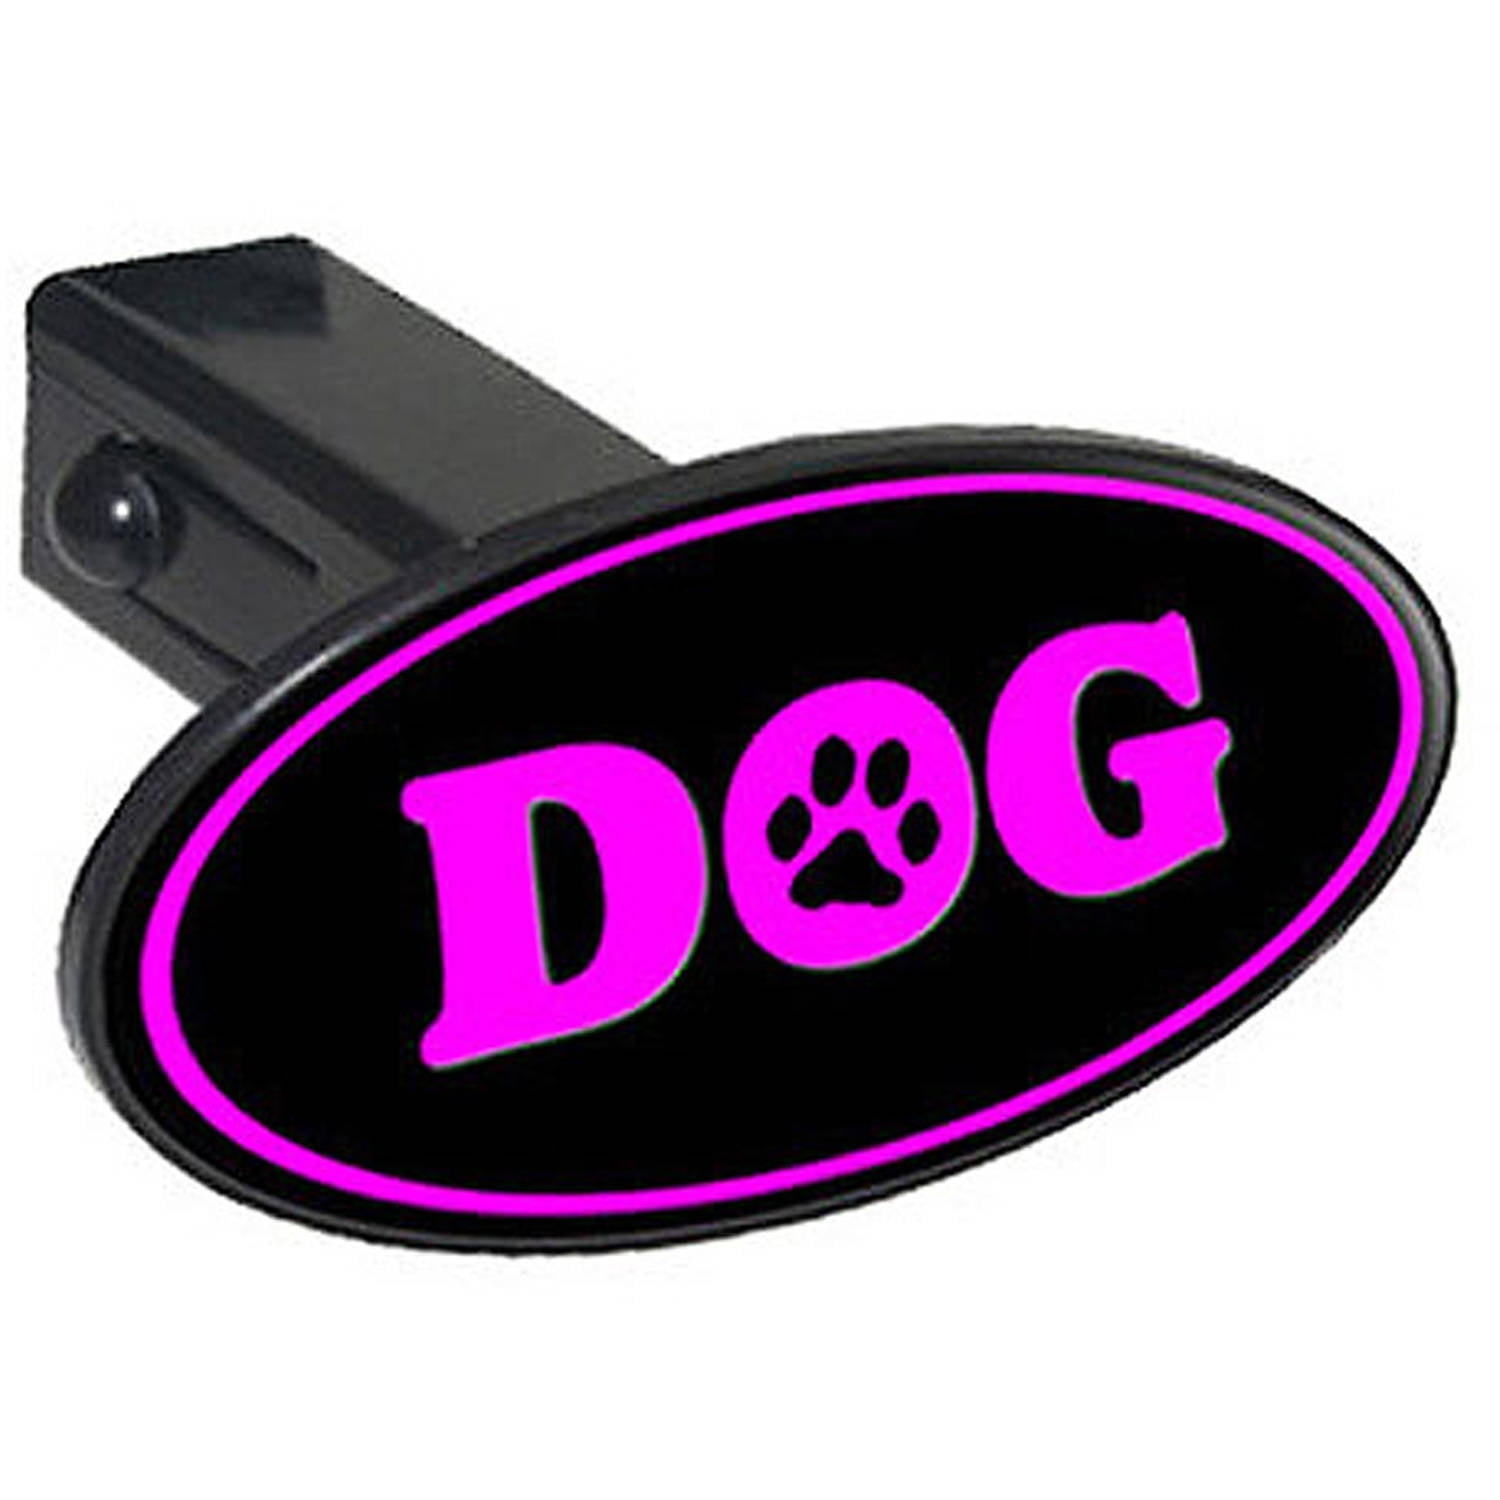 Graphics and More Powered by Coffee Oval Tow Trailer Hitch Cover Plug Insert 1 1/4 inch 1.25 